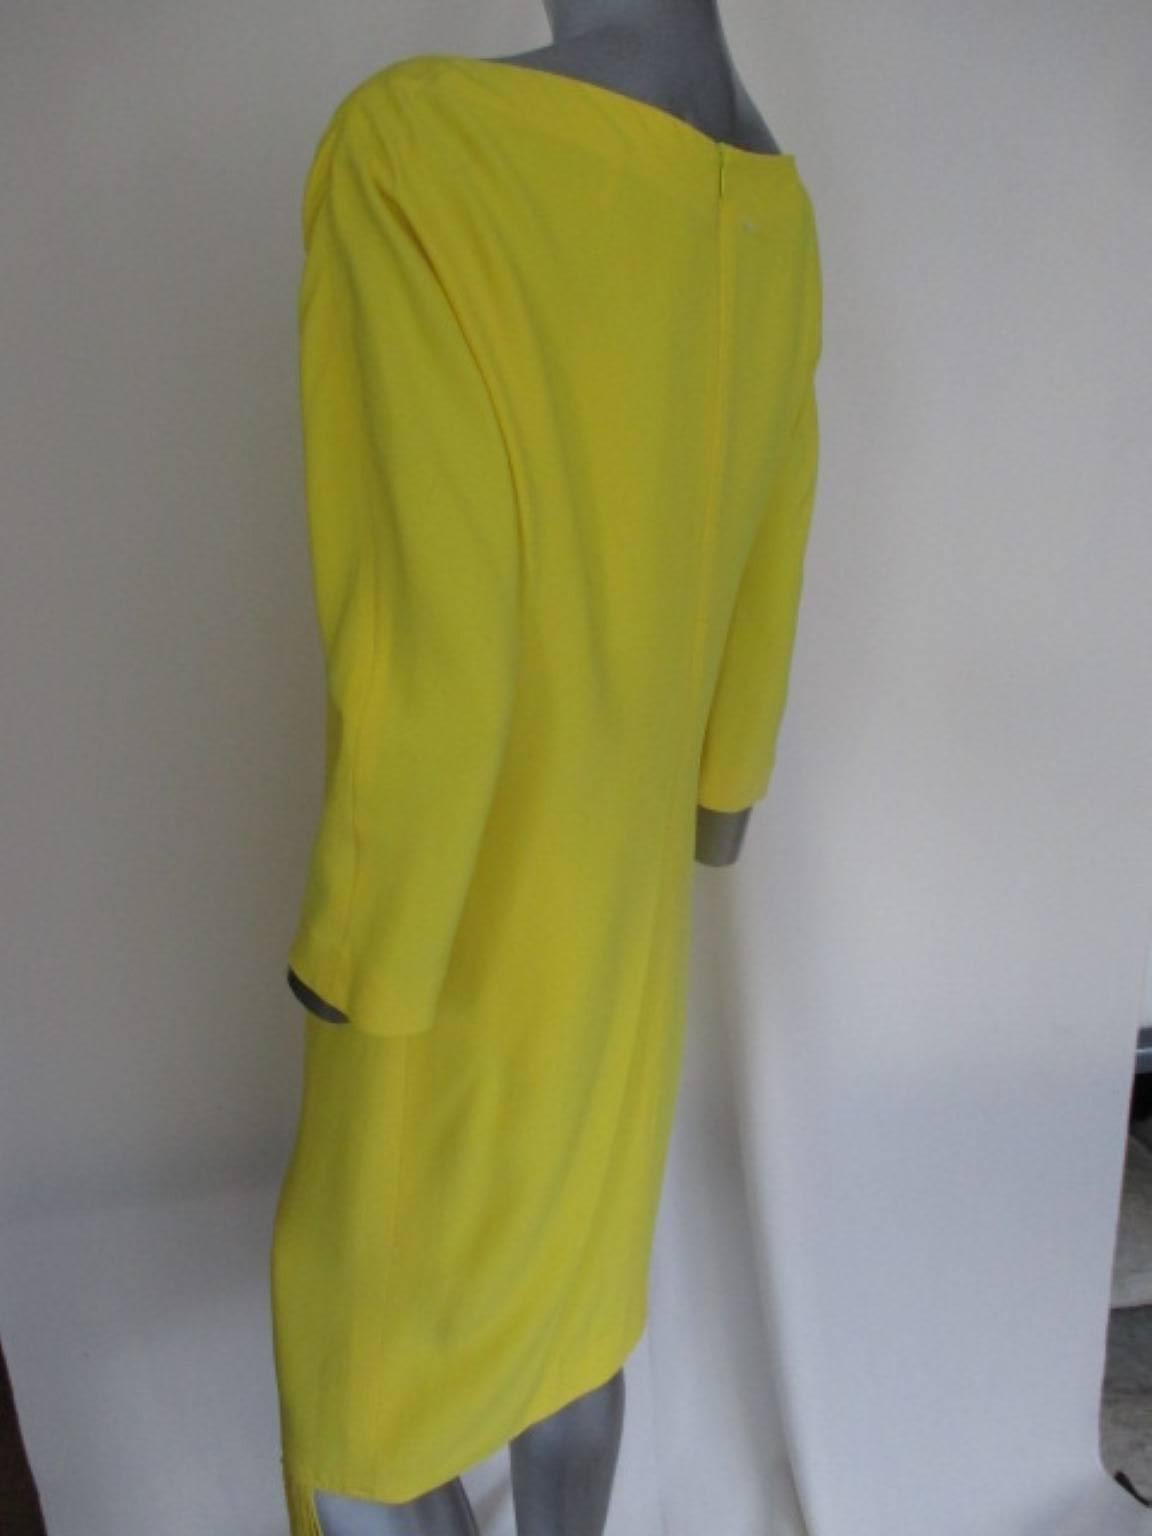 Gianfranco Ferre fringed yellow dress In Good Condition For Sale In Amsterdam, NL